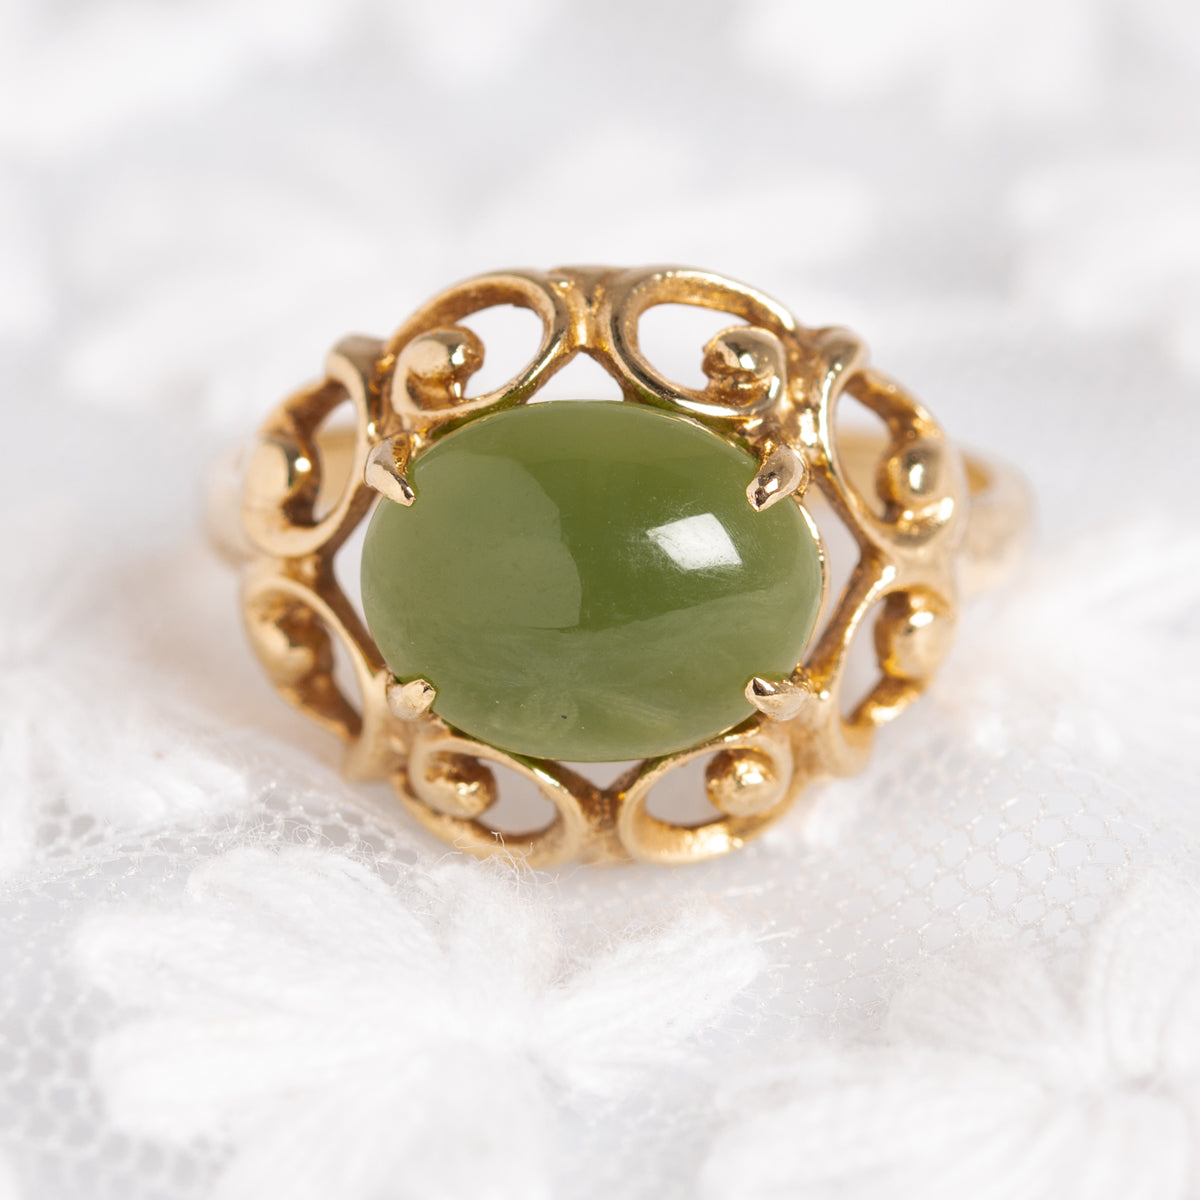 Vintage 9ct Gold Jade Gemstone Ring Green Oval Cabochon c1990 UK Size N (A1356)